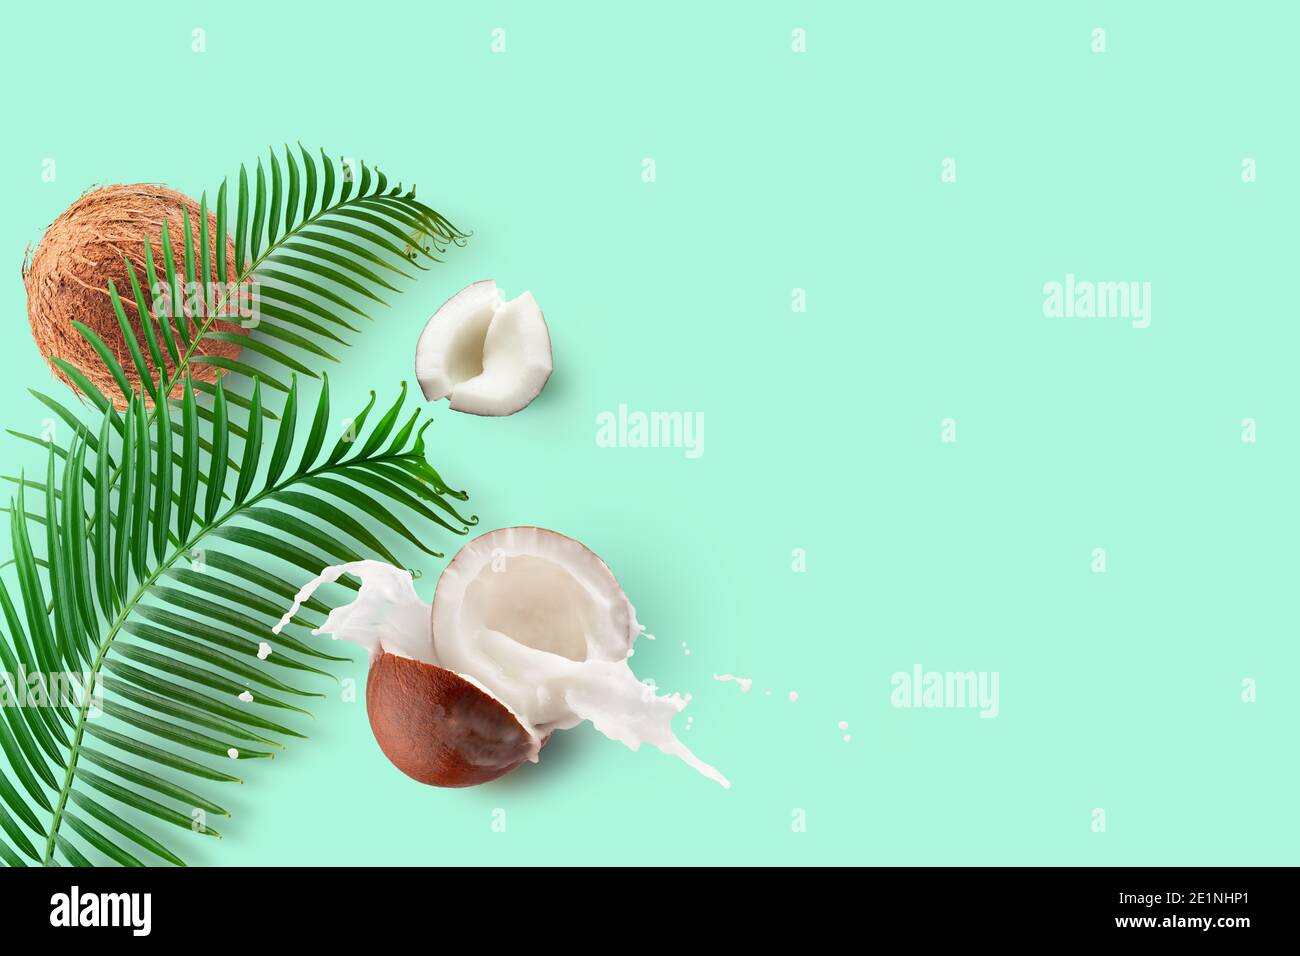 coconuts with milk splash and green palm leaves on a mint green background. Stock Photo